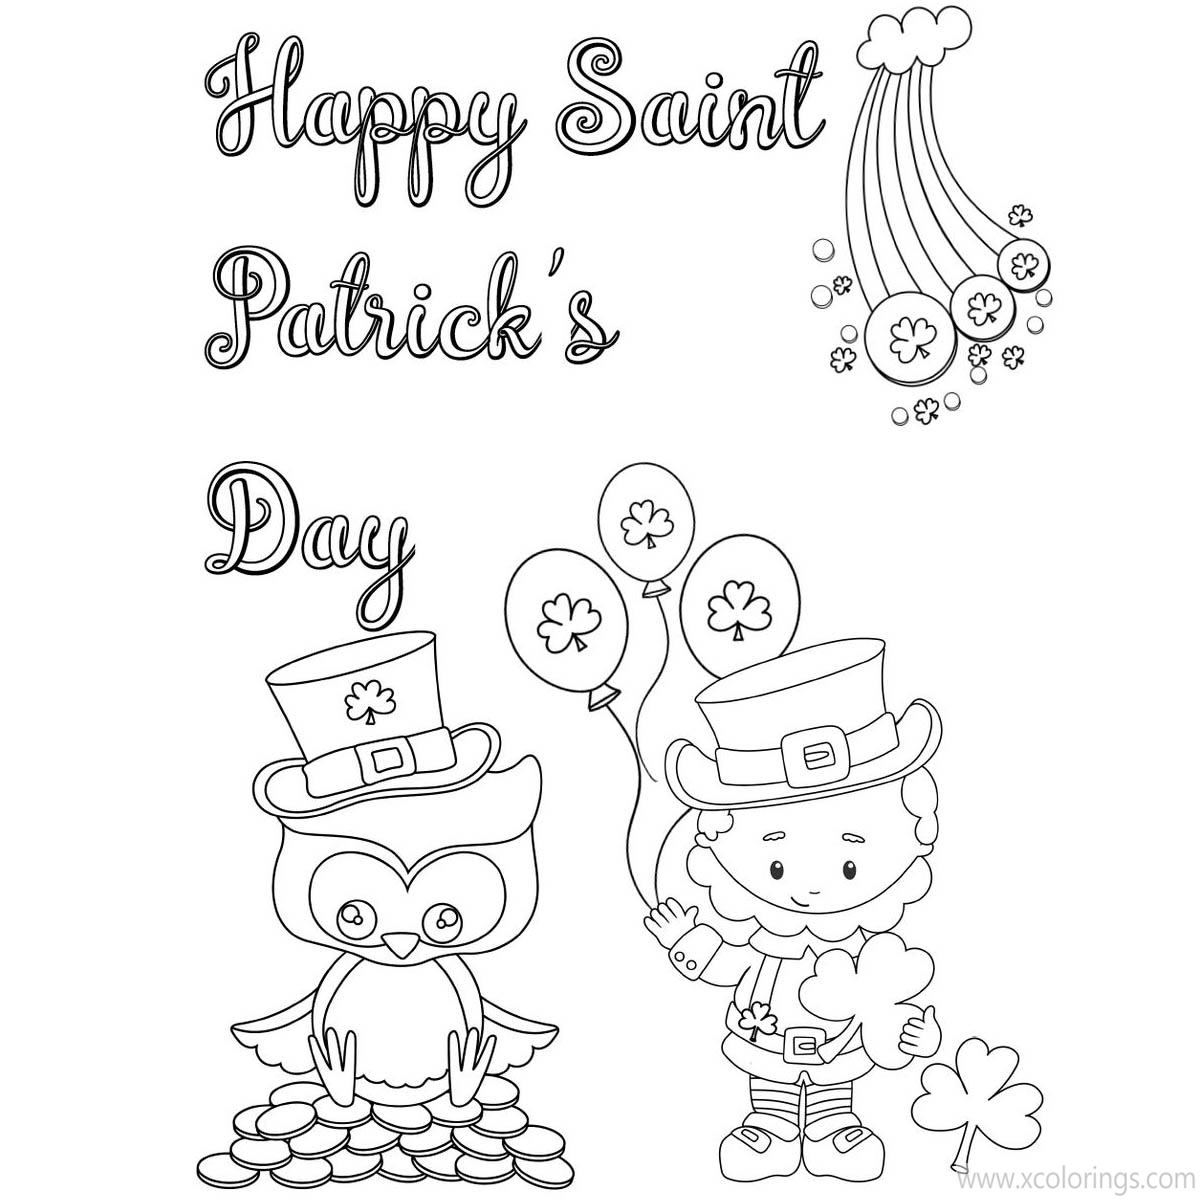 Free St. Patrick's Day Coloring Pages Boy and Owl printable